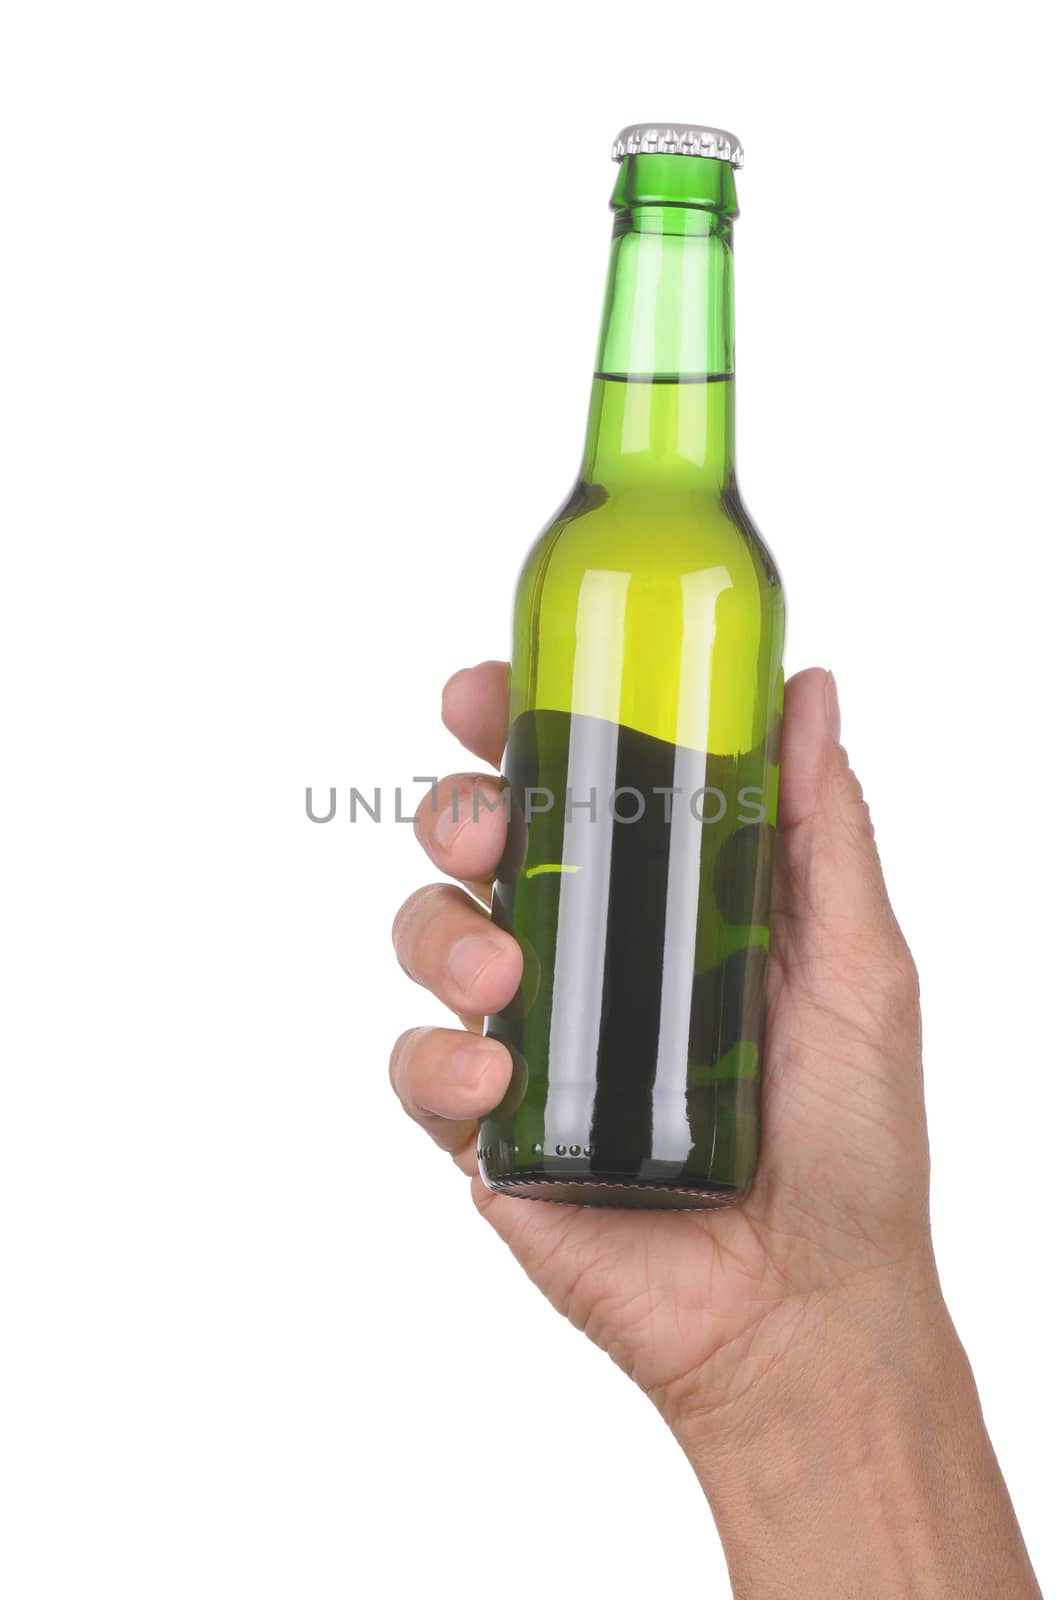 Man's hand holding up a green beer bottle without label over a white background vertical format